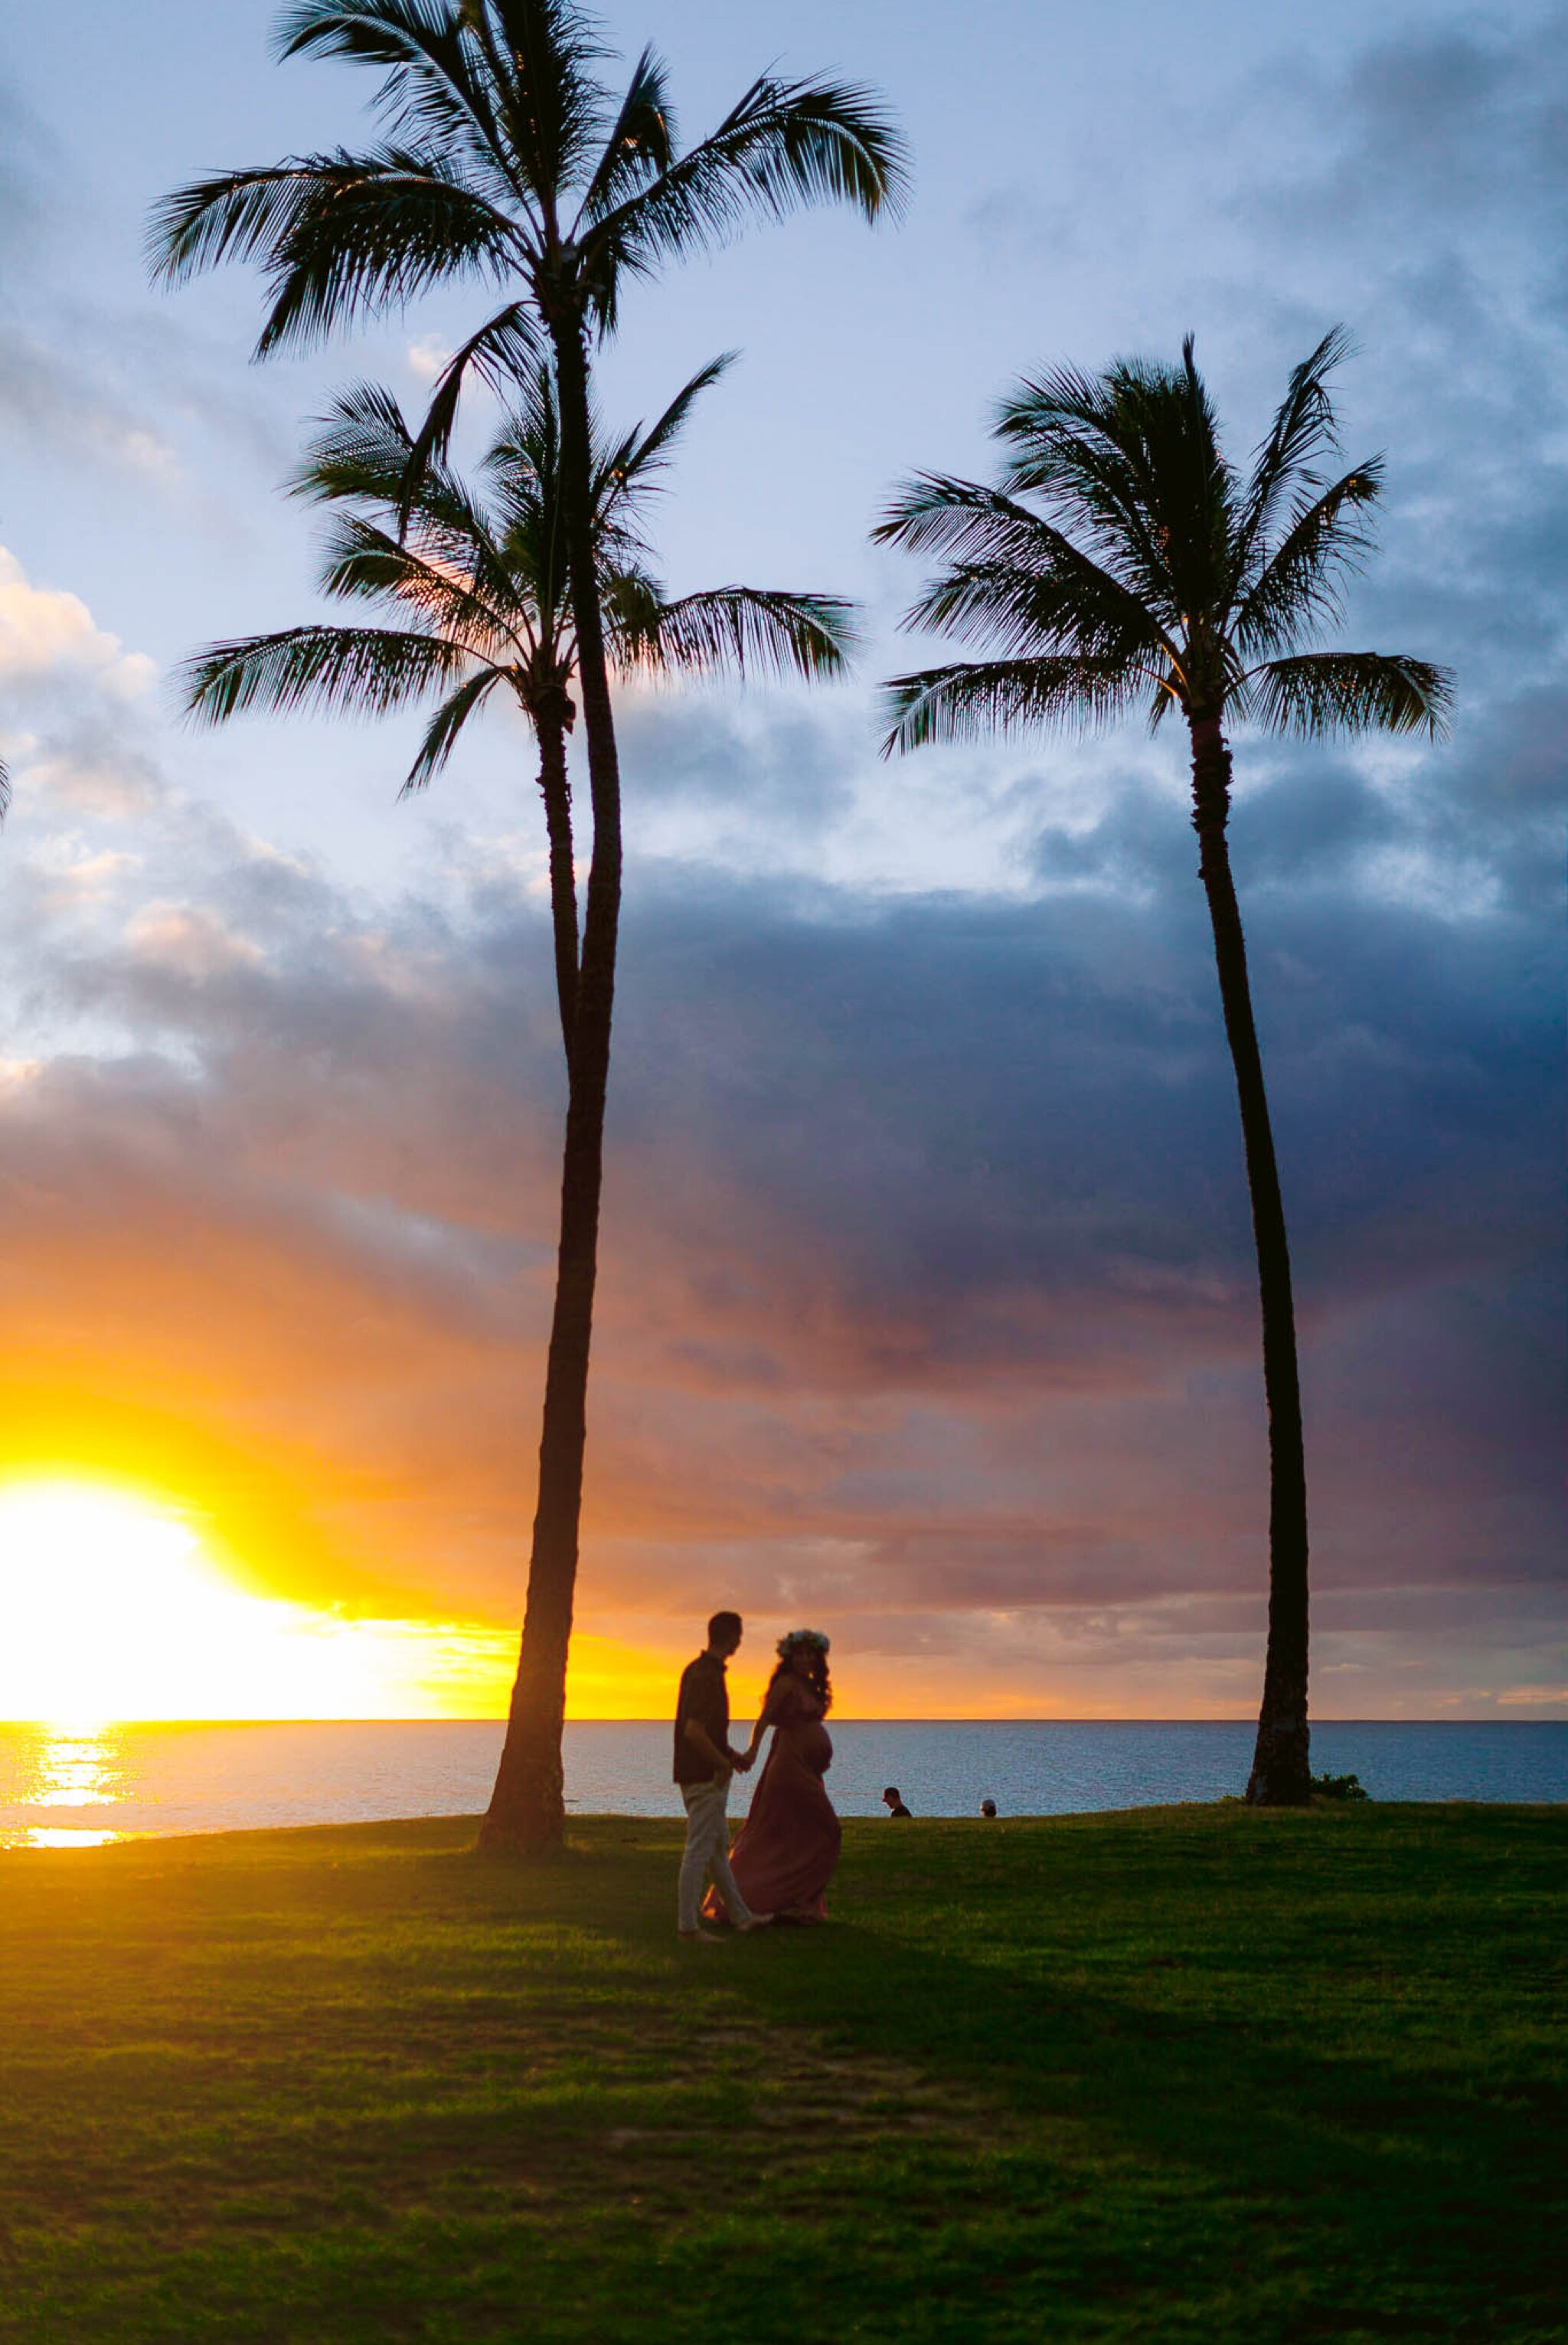 Colorful Sunset Maternity Photography Session at Maili Beach Park, Oahu West Side - Hawaii Family Photographer